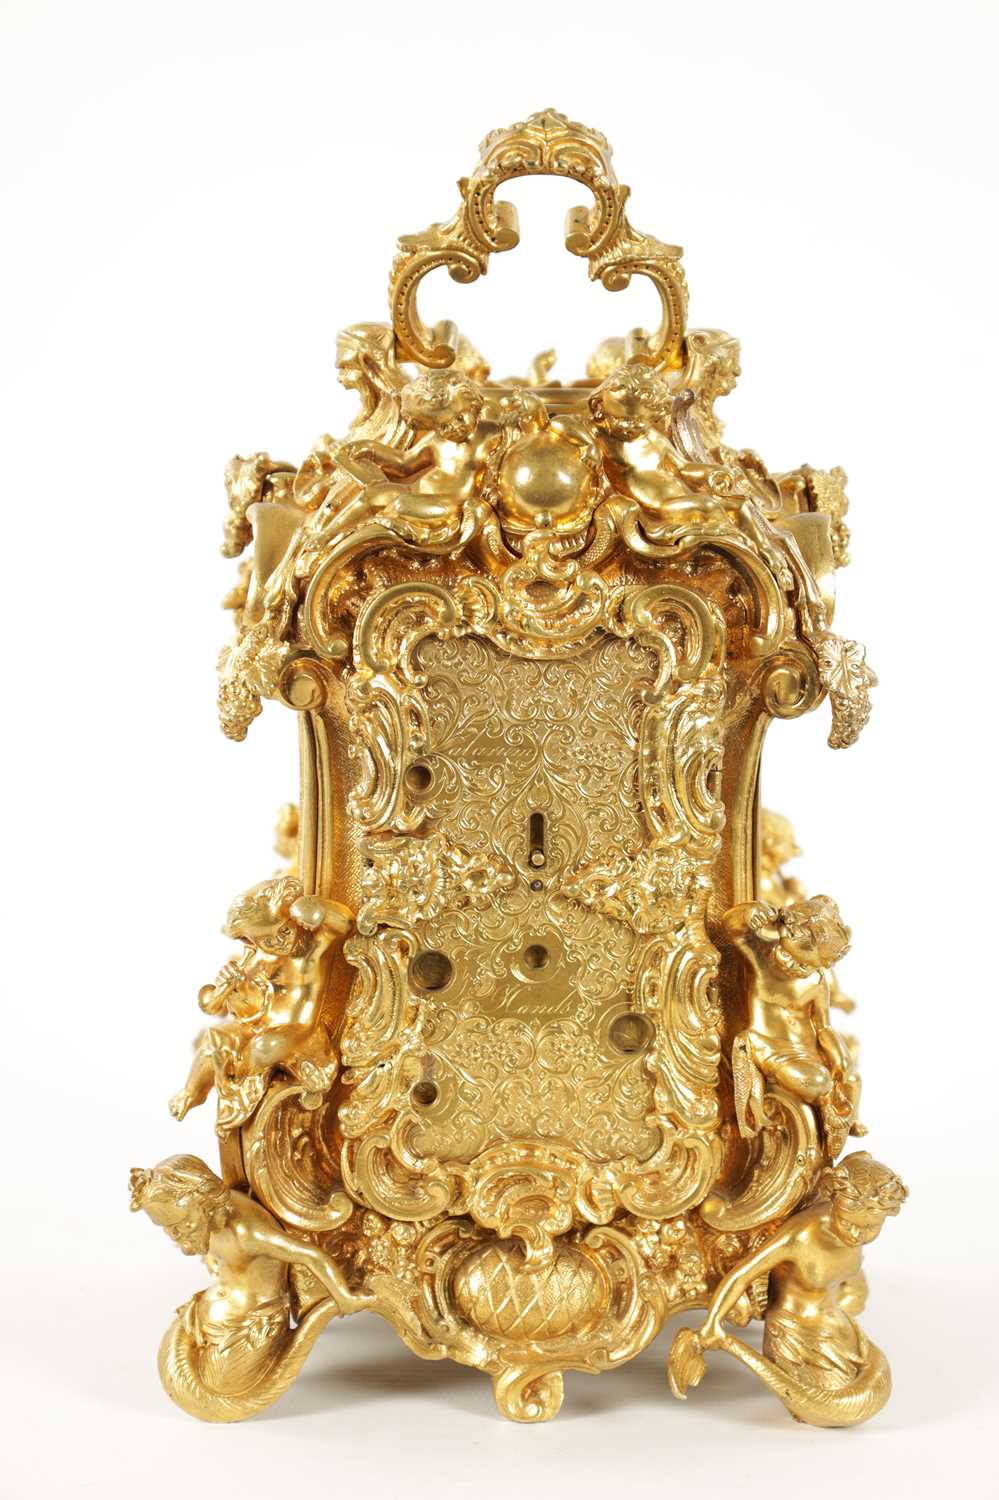 GROHE, PARIS. A FINE AND RARE MID 19TH CENTURY FRENCH CAST GILT BRASS ROCOCO REPEATING PETITE SONNER - Image 6 of 17